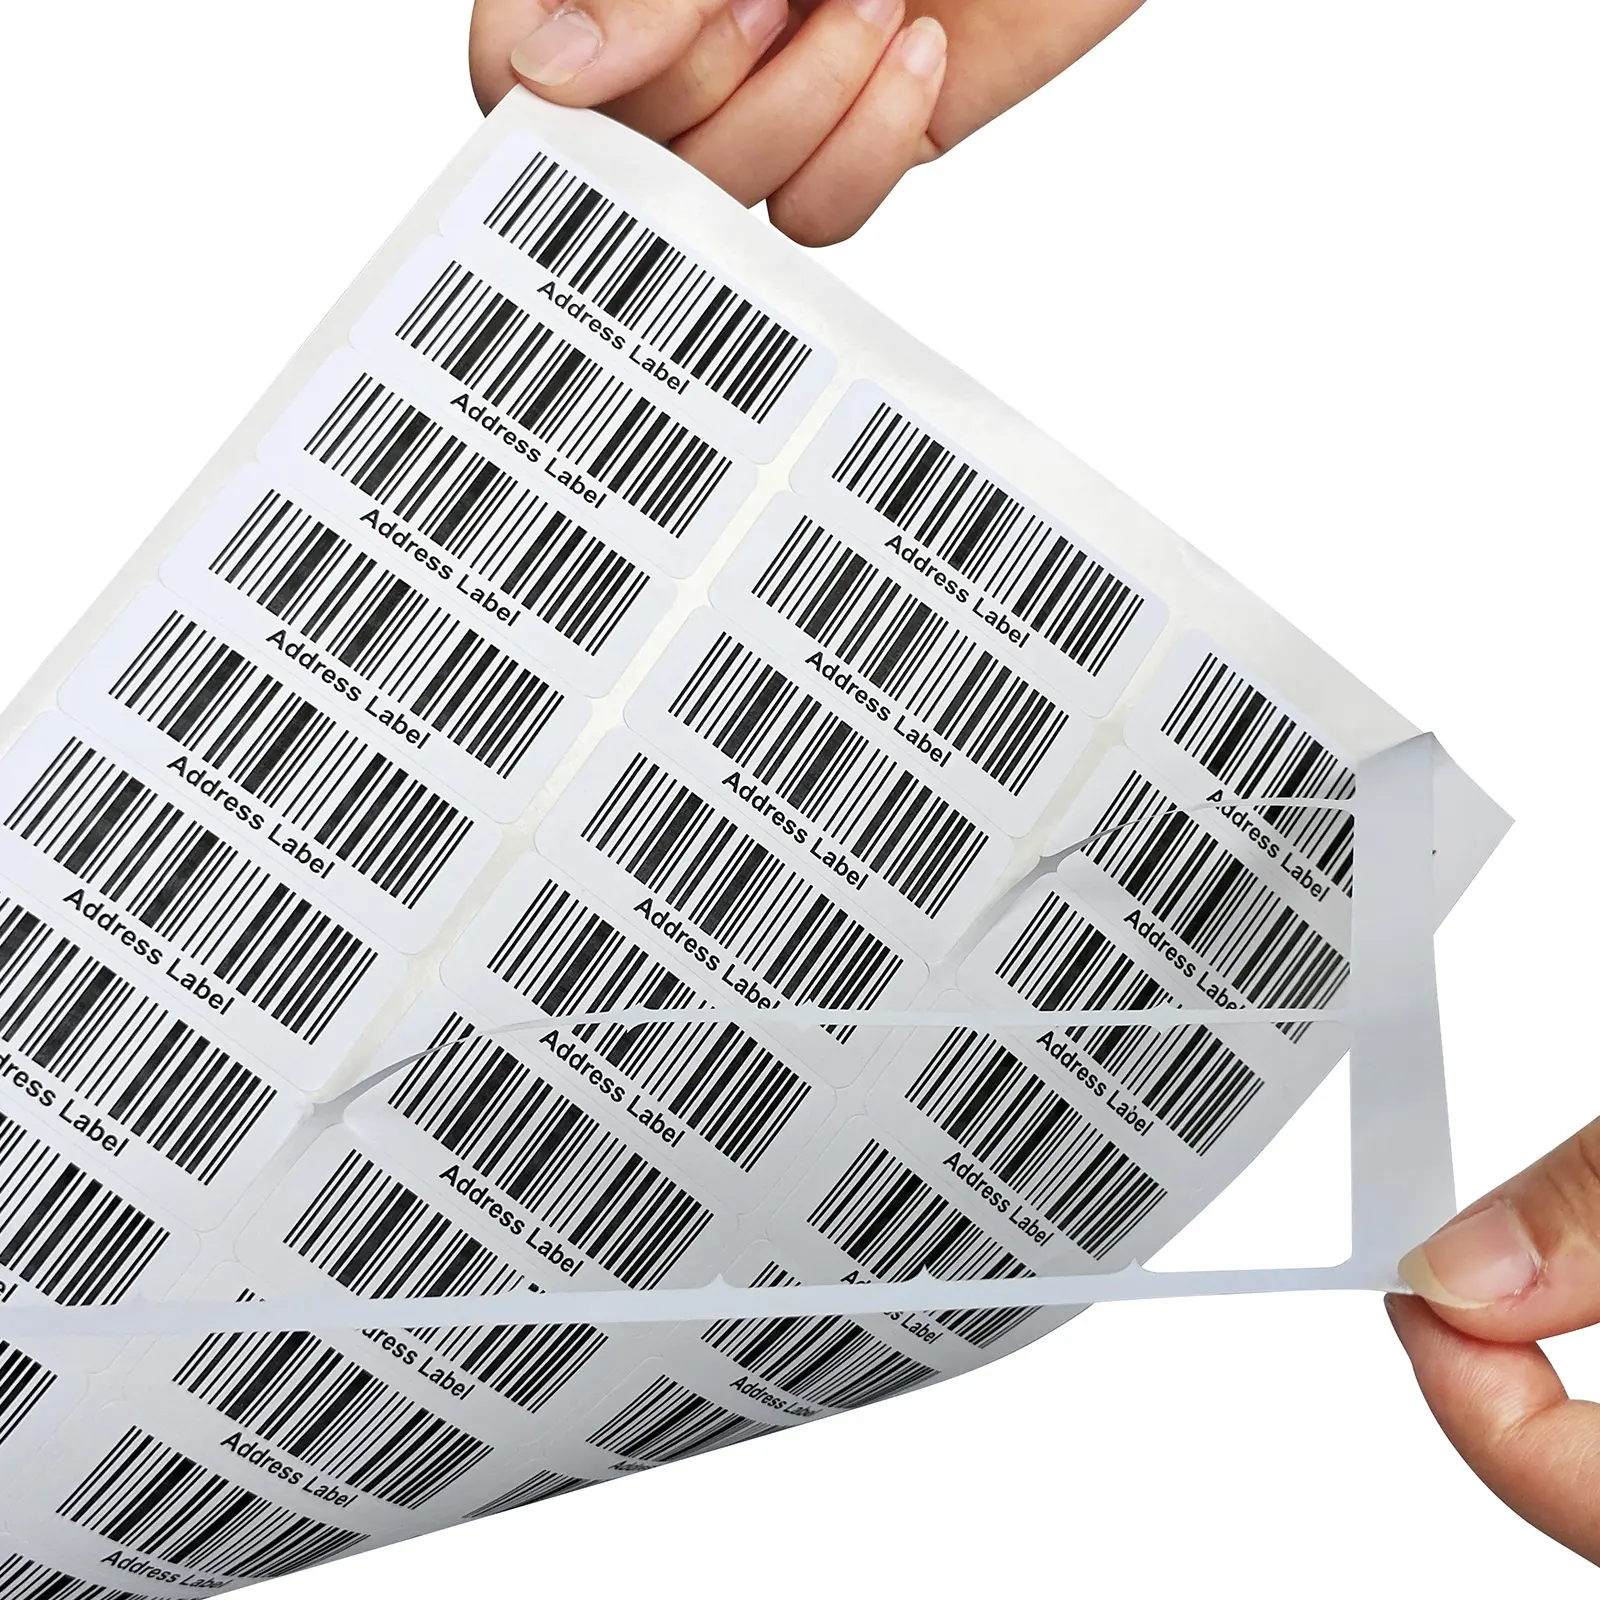 Factory Price A4 Sheet Adhesive Address Labels 30 Up Barcode Feature for Laser   Inkjet Printer Packages Shipping Labels